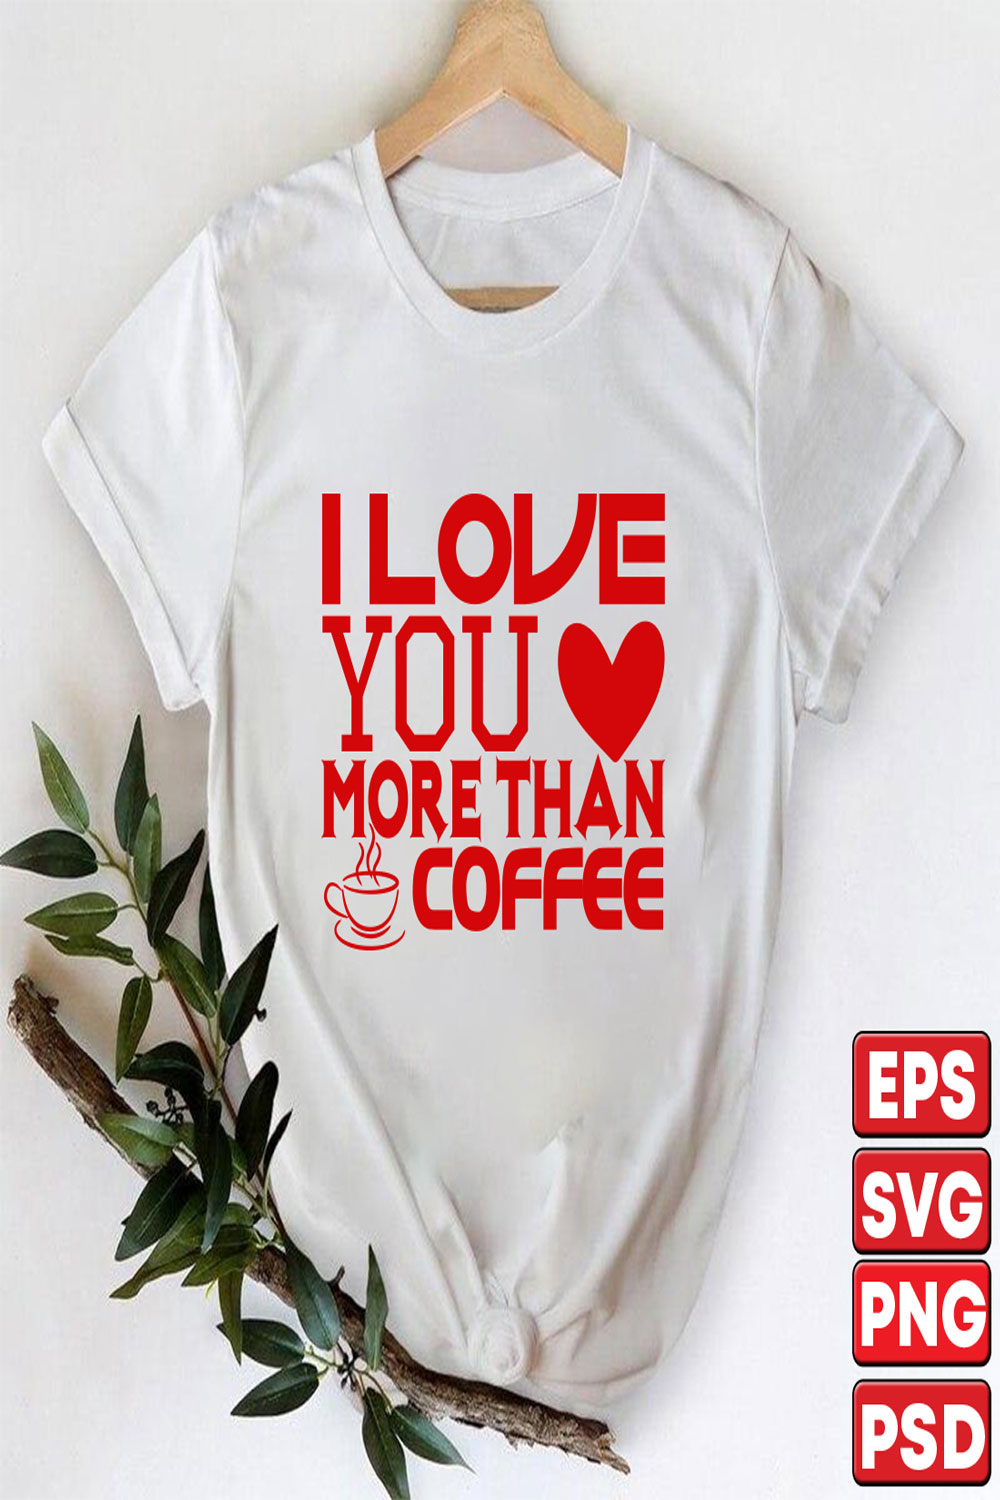 I love you more than coffee pinterest preview image.